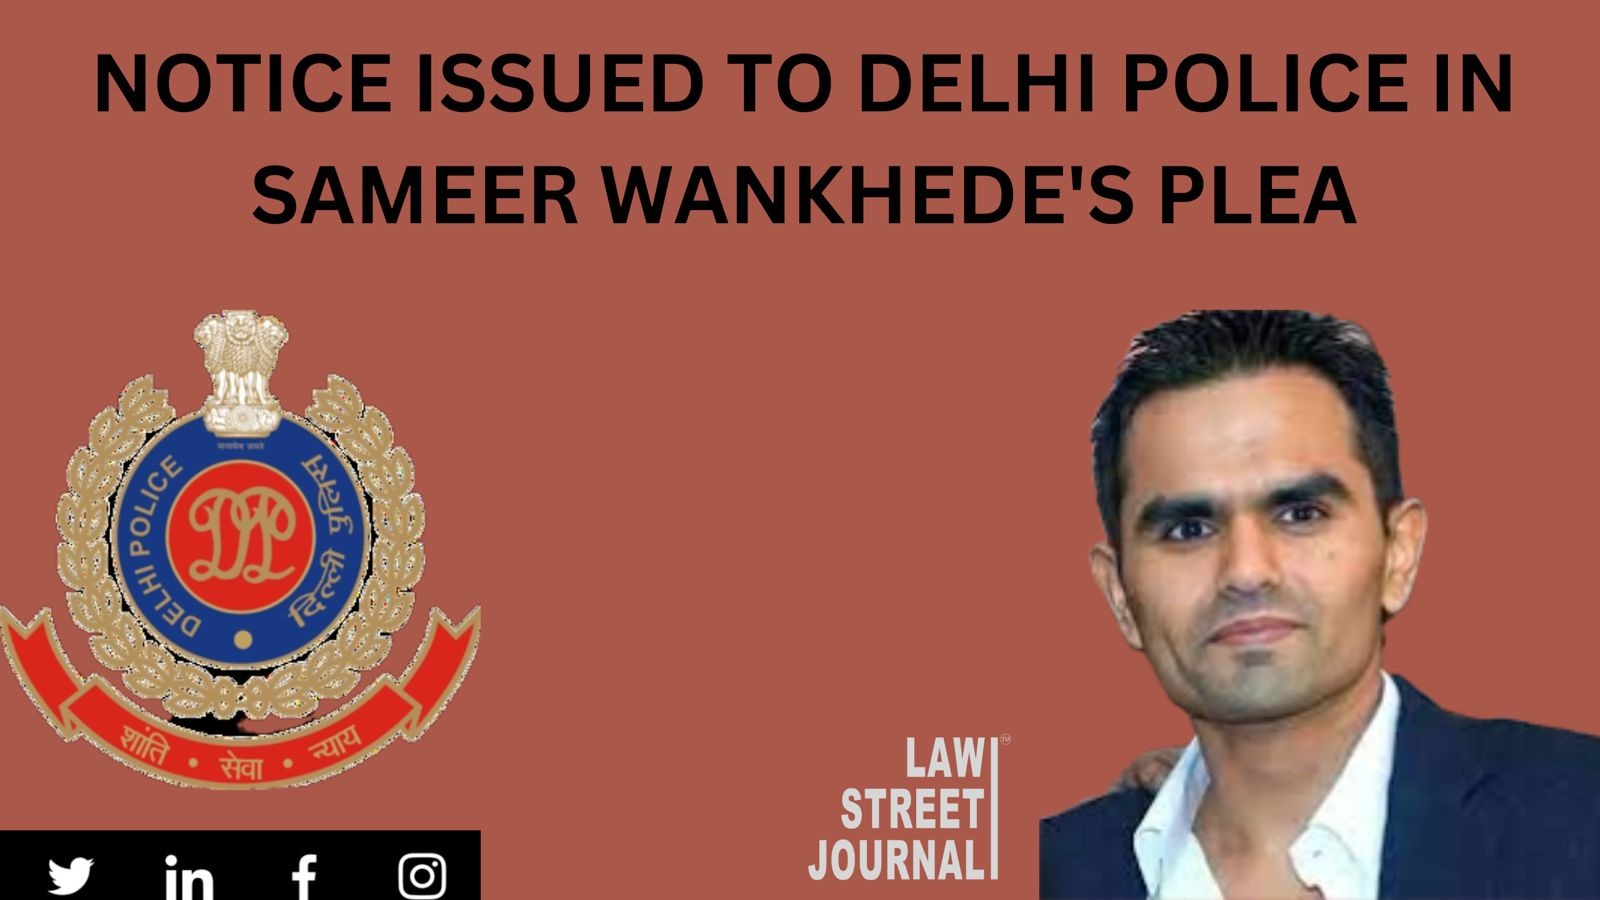 Cordelia cruise drugs case: Delhi Court issues notice to Police on Sameer Wankhede's plea against Gyaneswar Singh [Read Order]